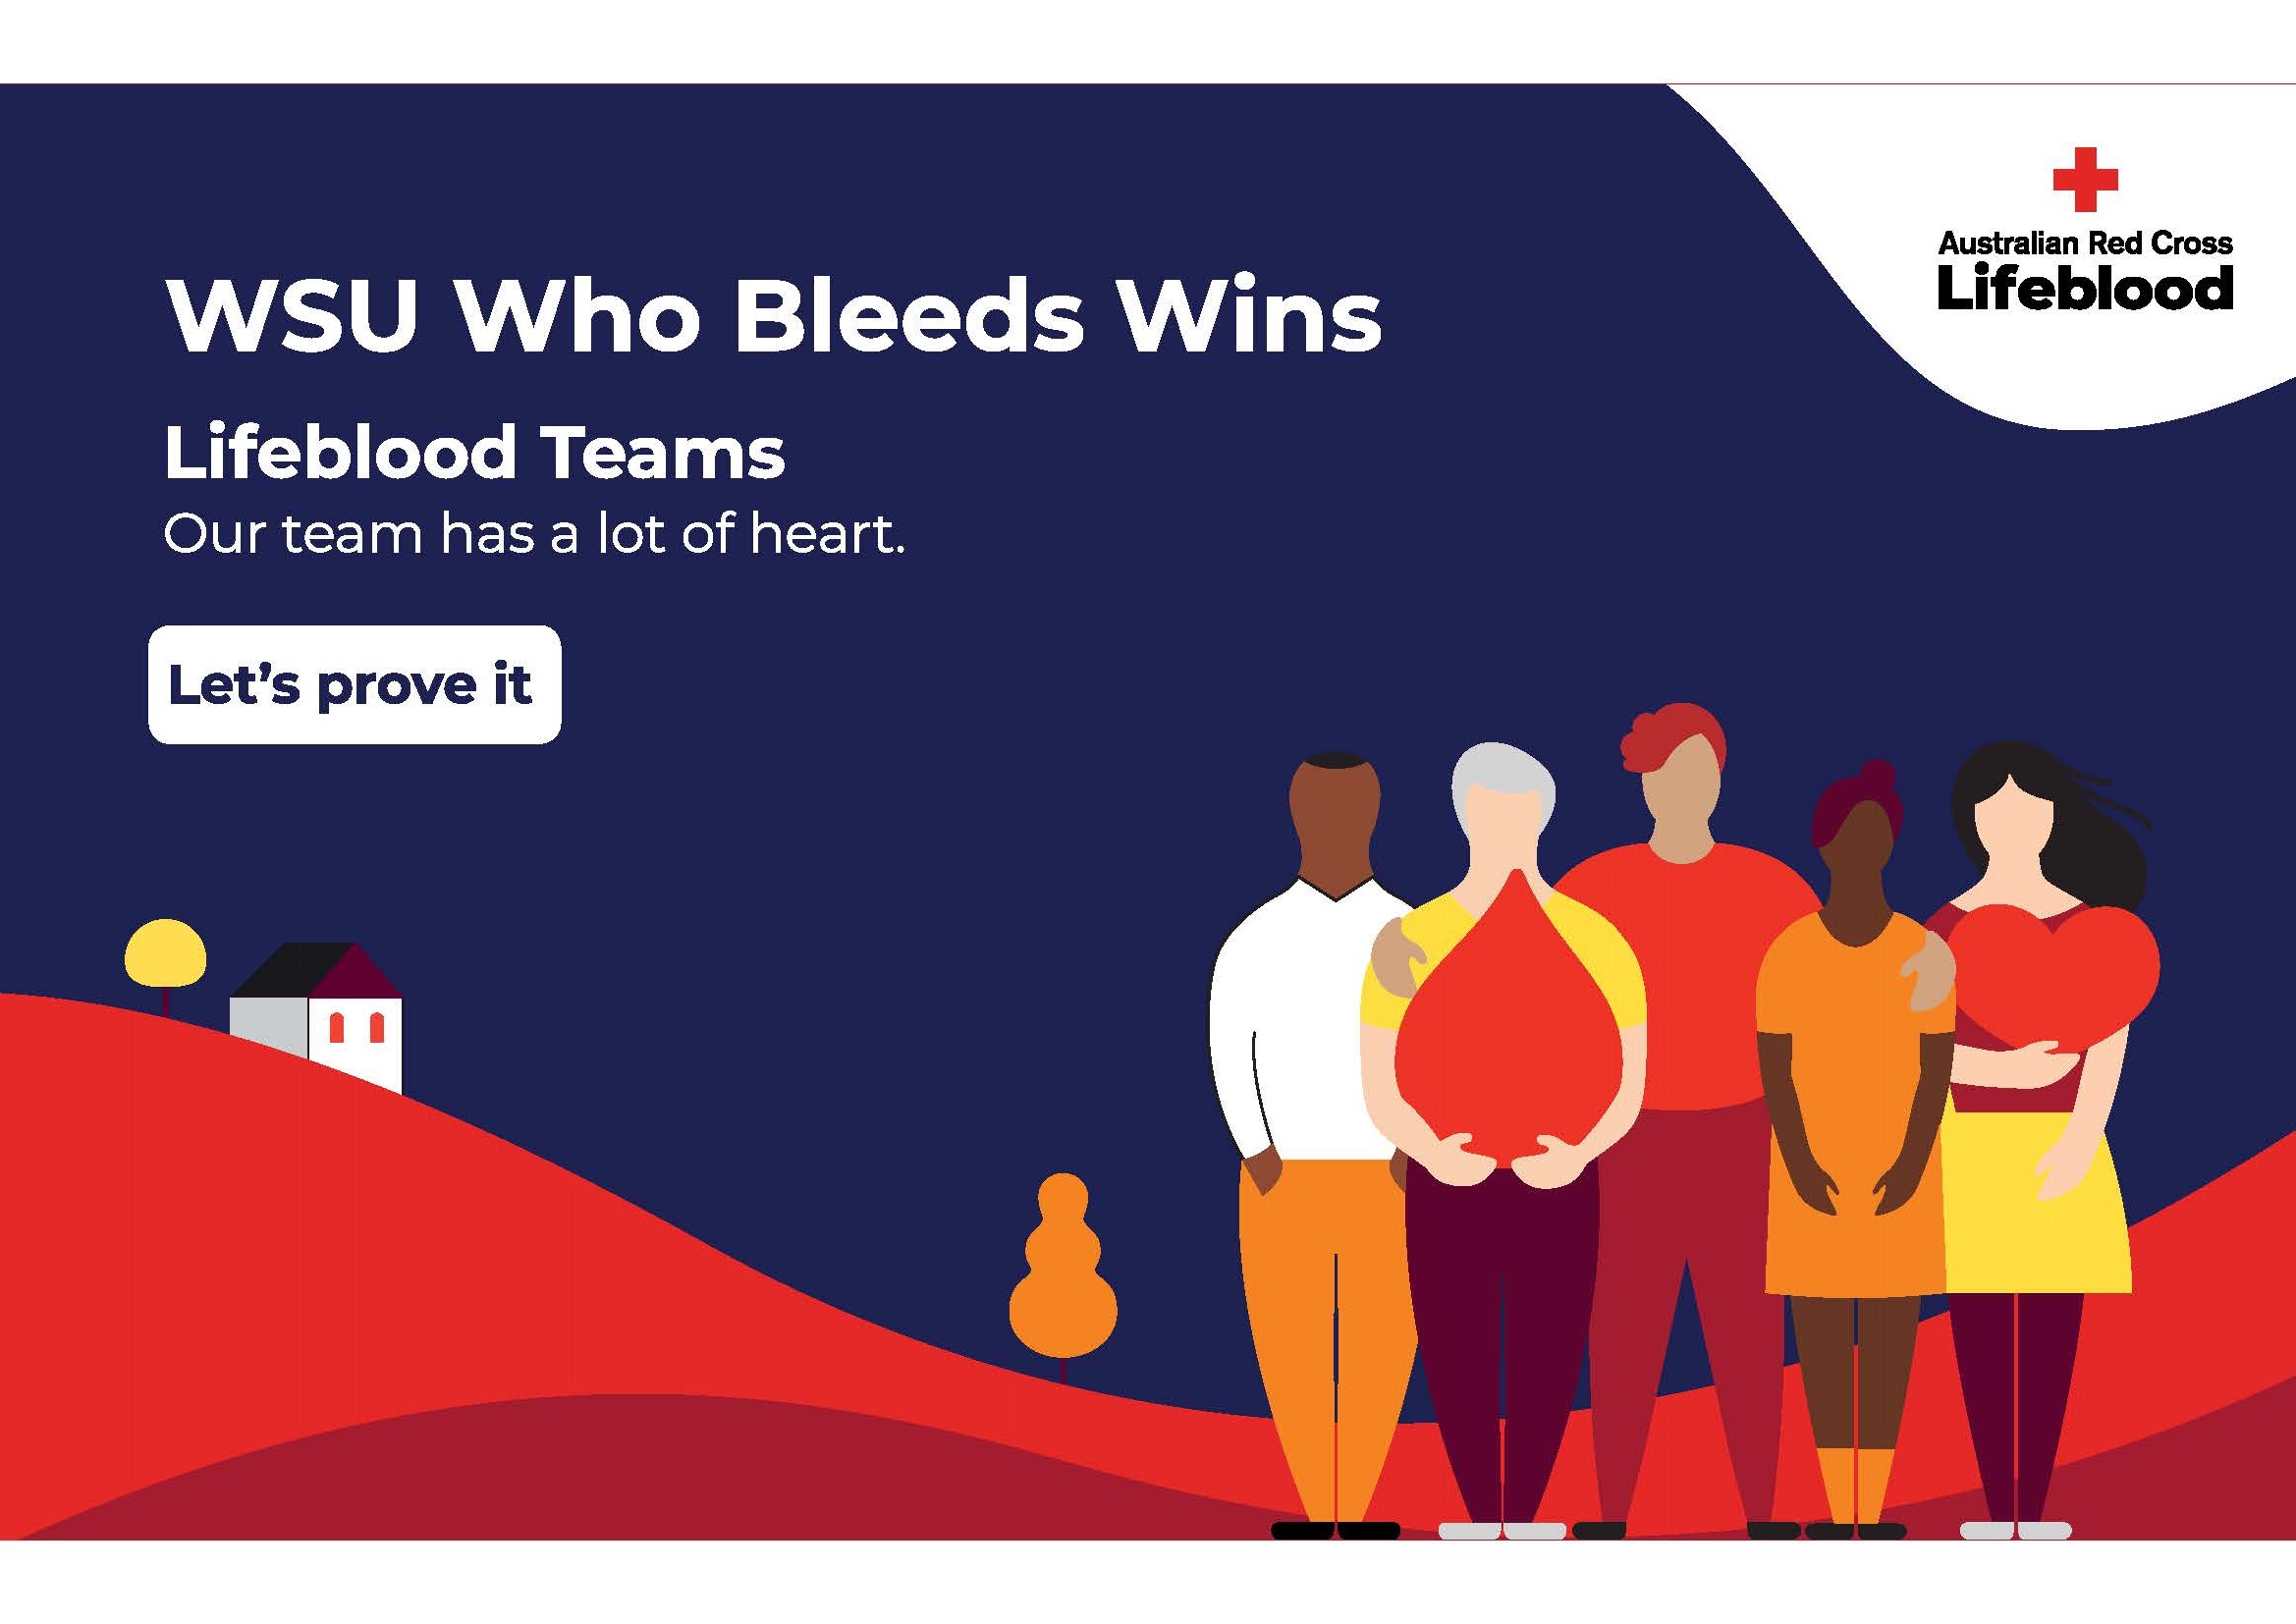 WSU Who Bleeds Wins Lifeblood Teams Our team has a lot of heart LES PROVE IT